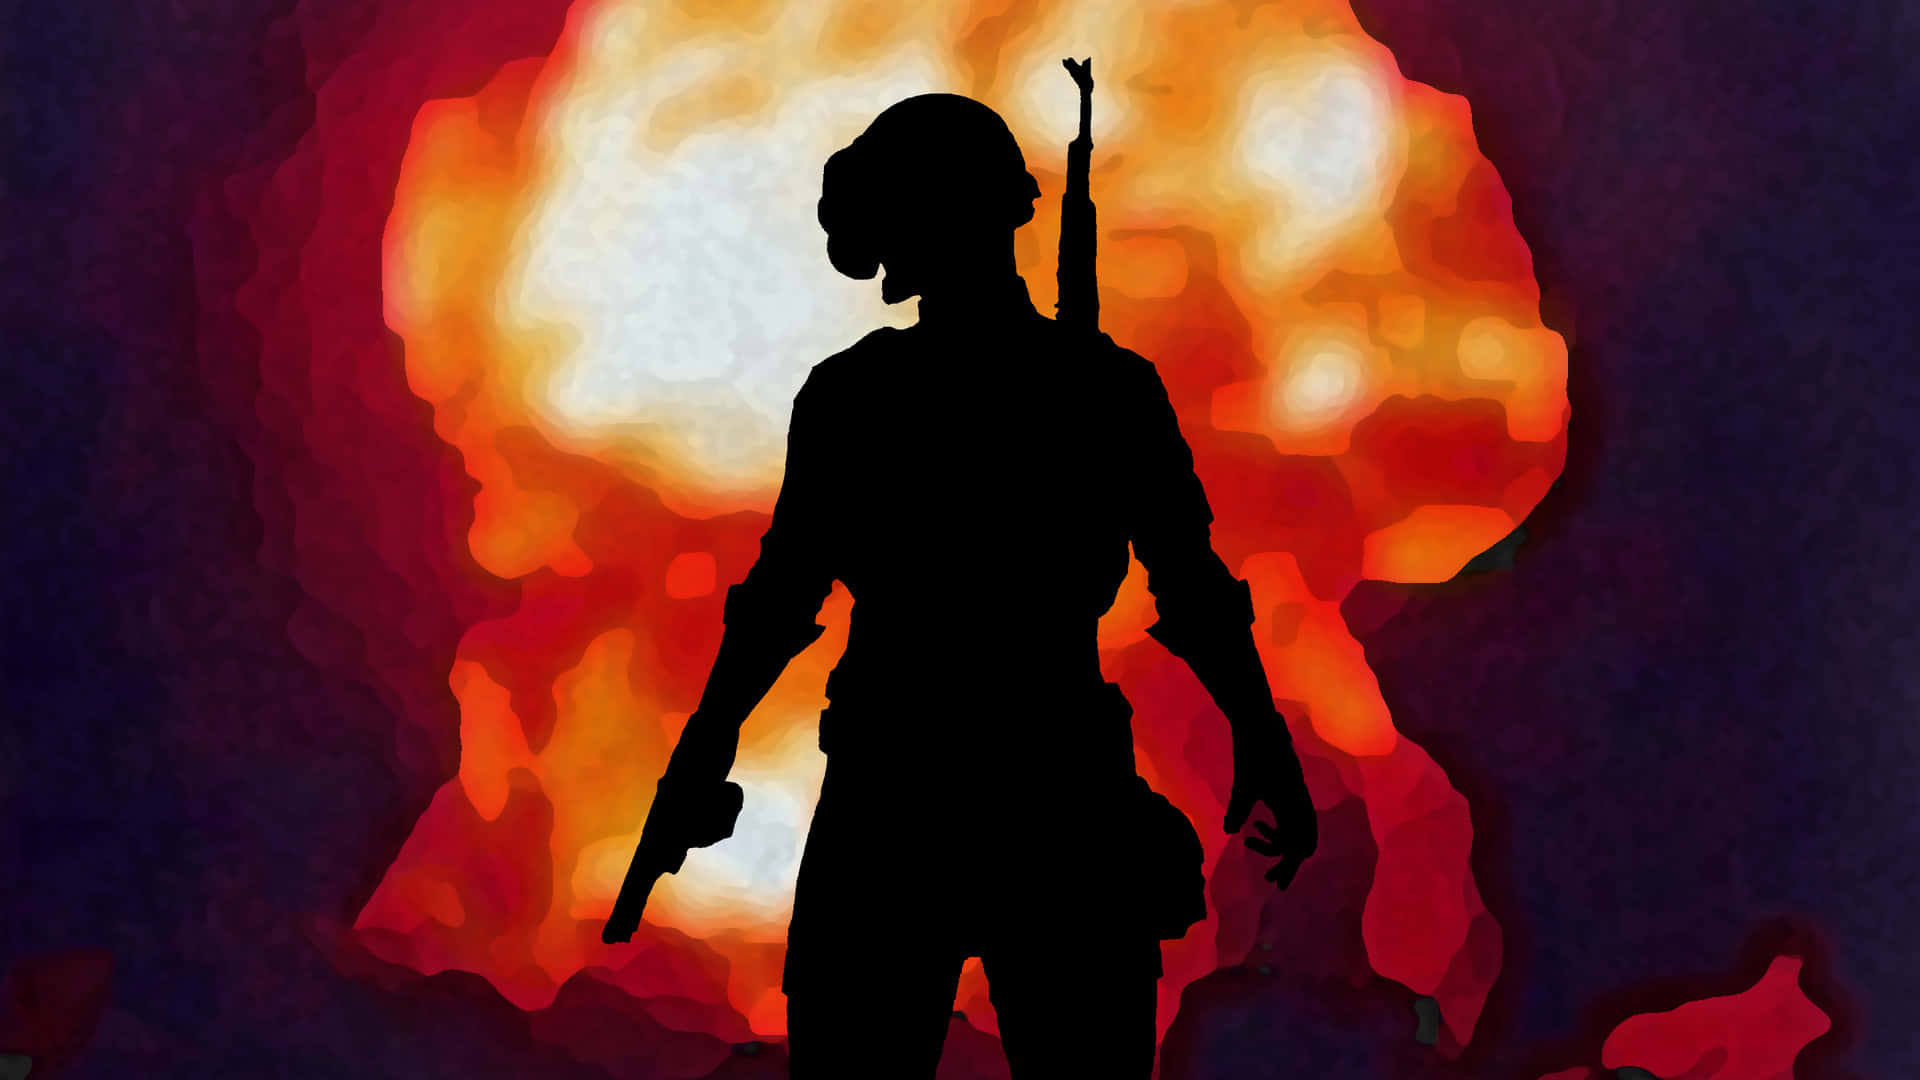 A Silhouette Of A Soldier Standing In Front Of An Explosion